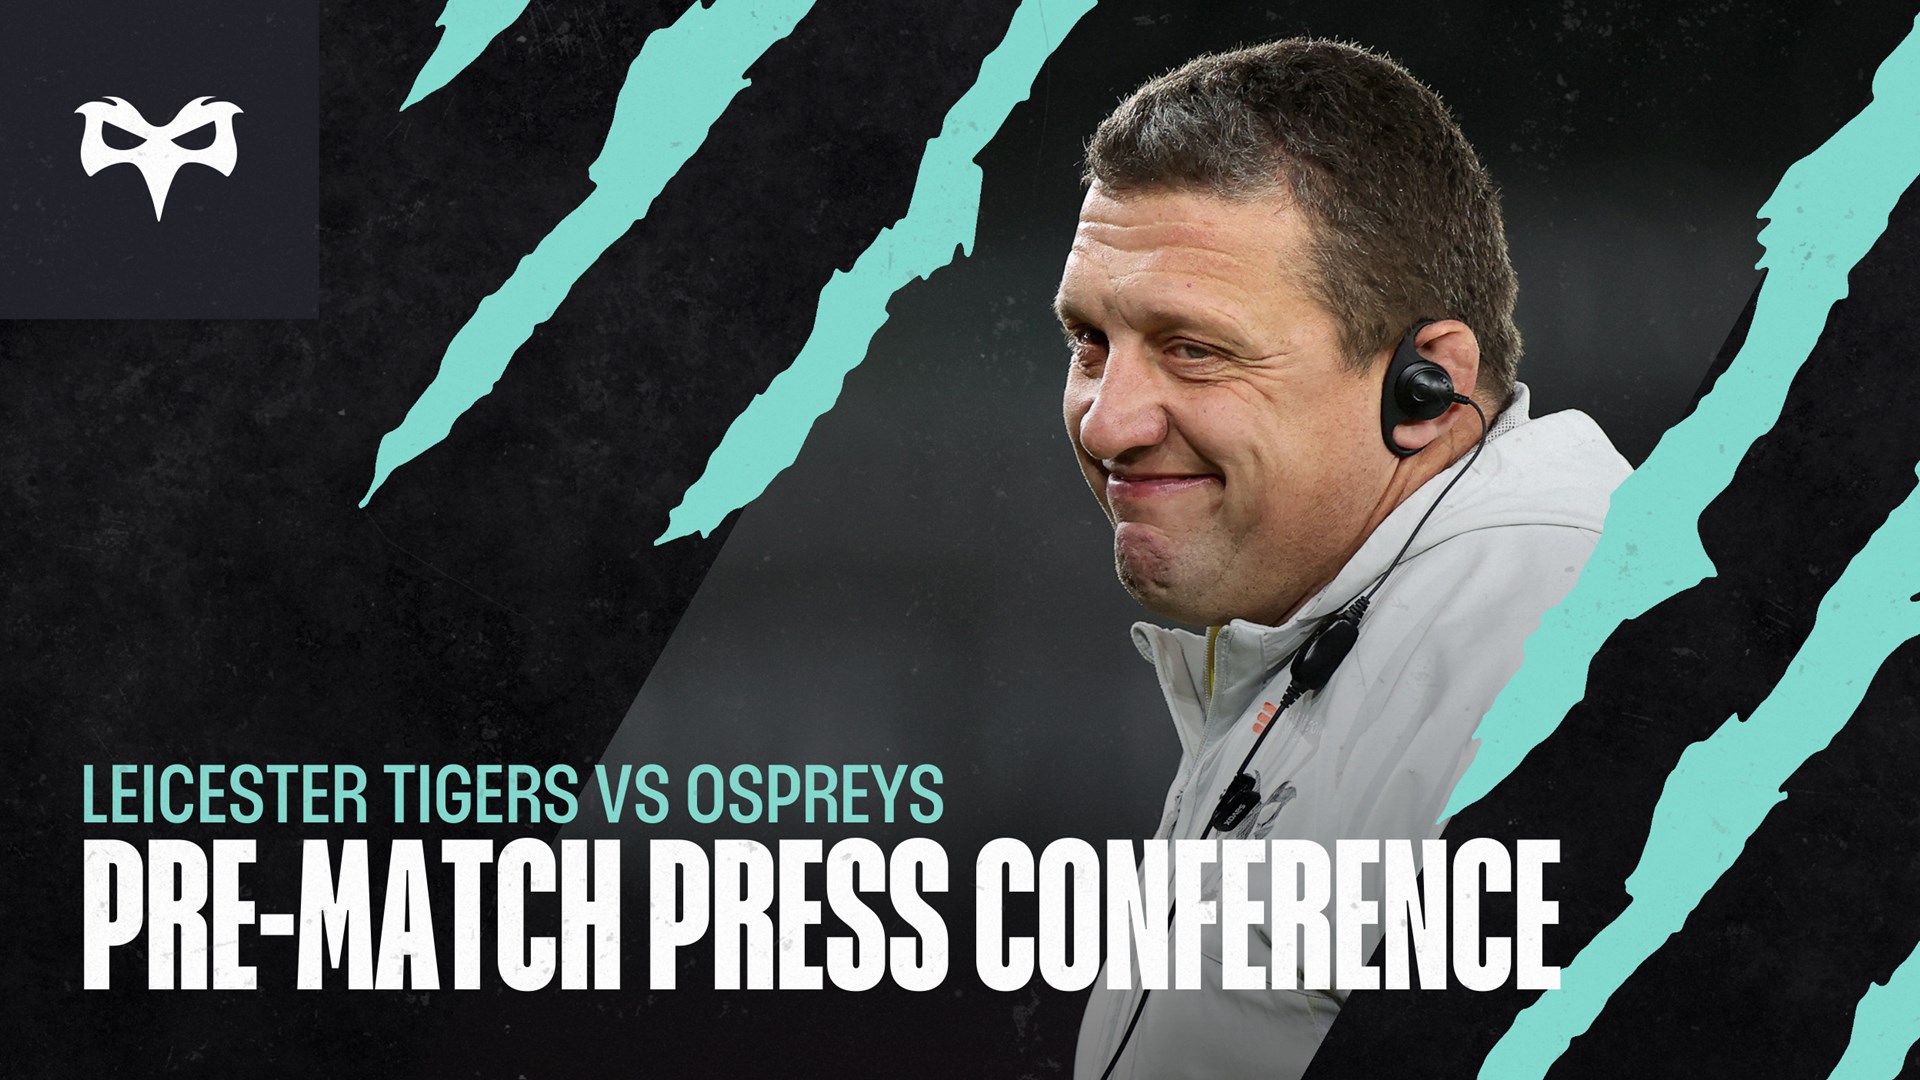  Pre-Match Press Conference - Toby Booth (Vs Leicester Tigers)